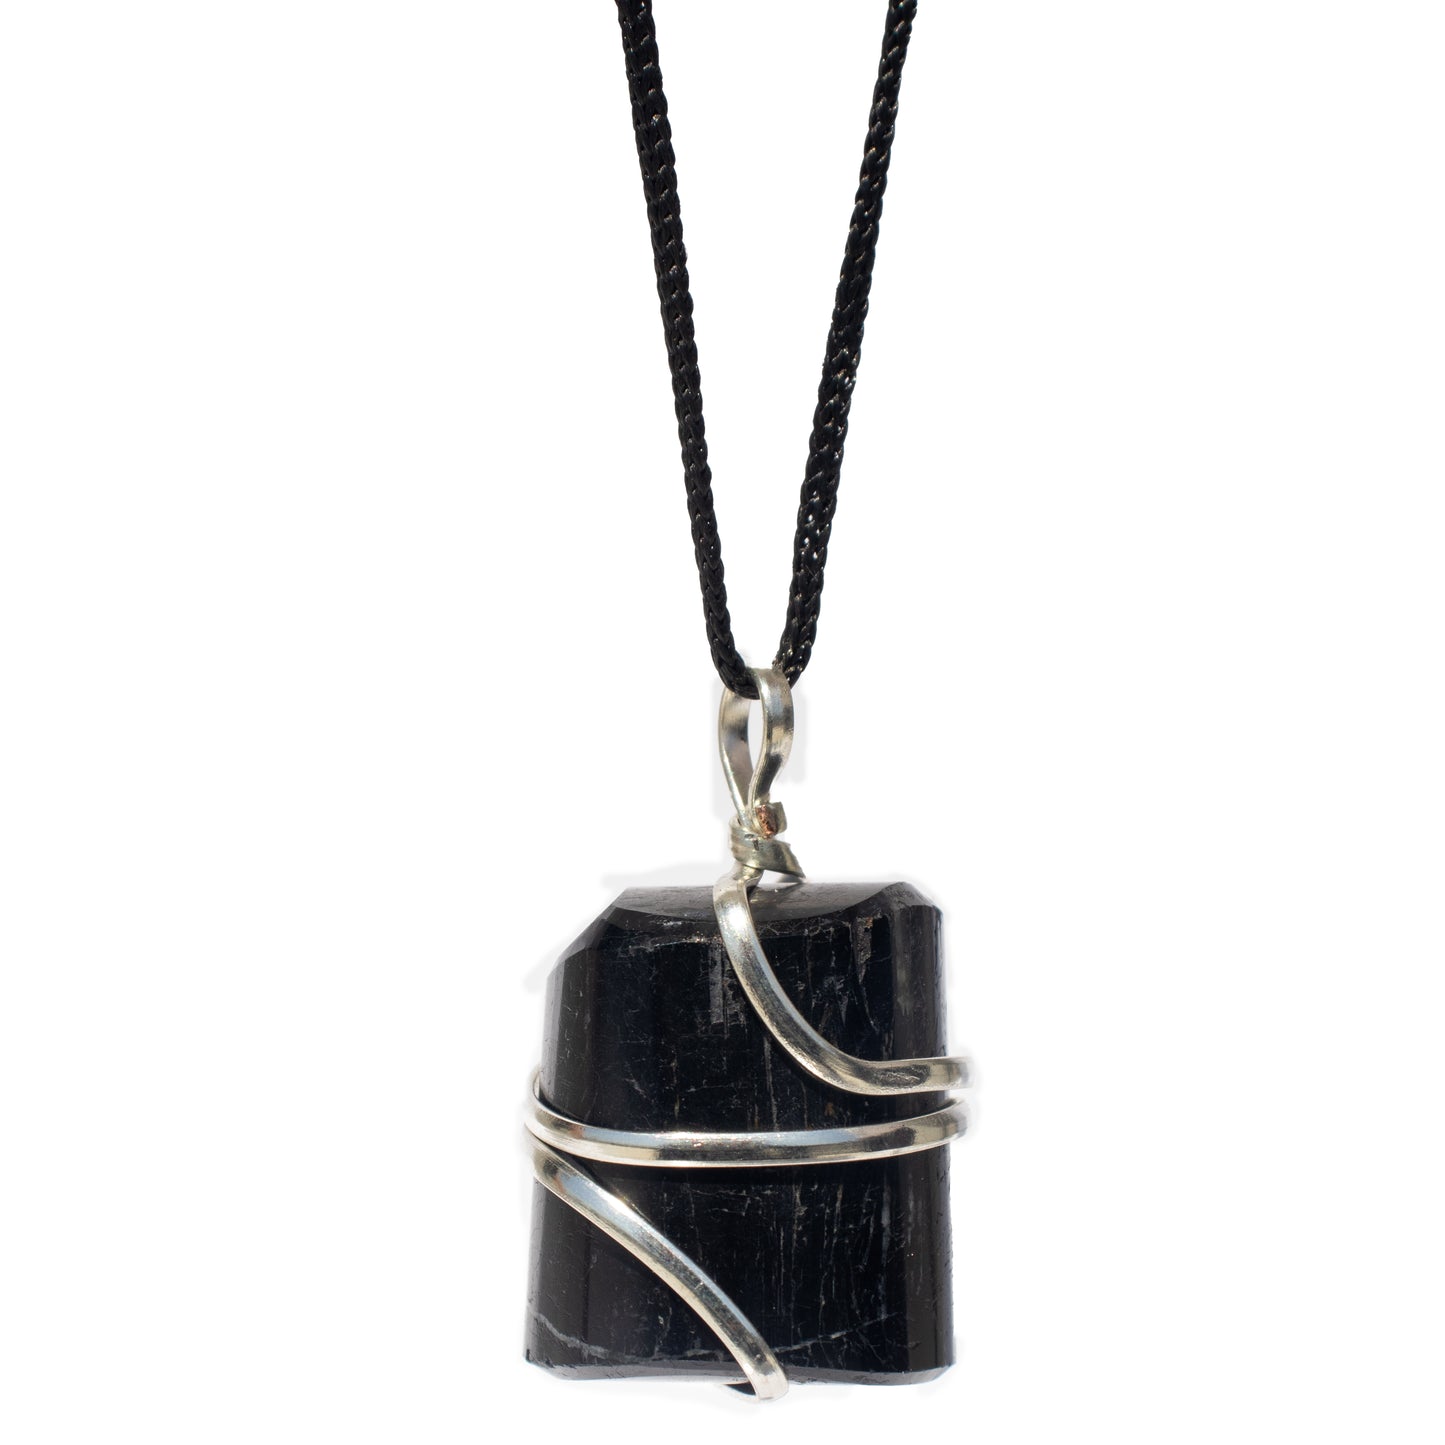 Black Tourmaline Crystal Pendant Necklace for Protection and grounding - Handmade & Ethically Sourced Raw Stone Necklace for Everyday Wear - Best Mother's Day Gift for her